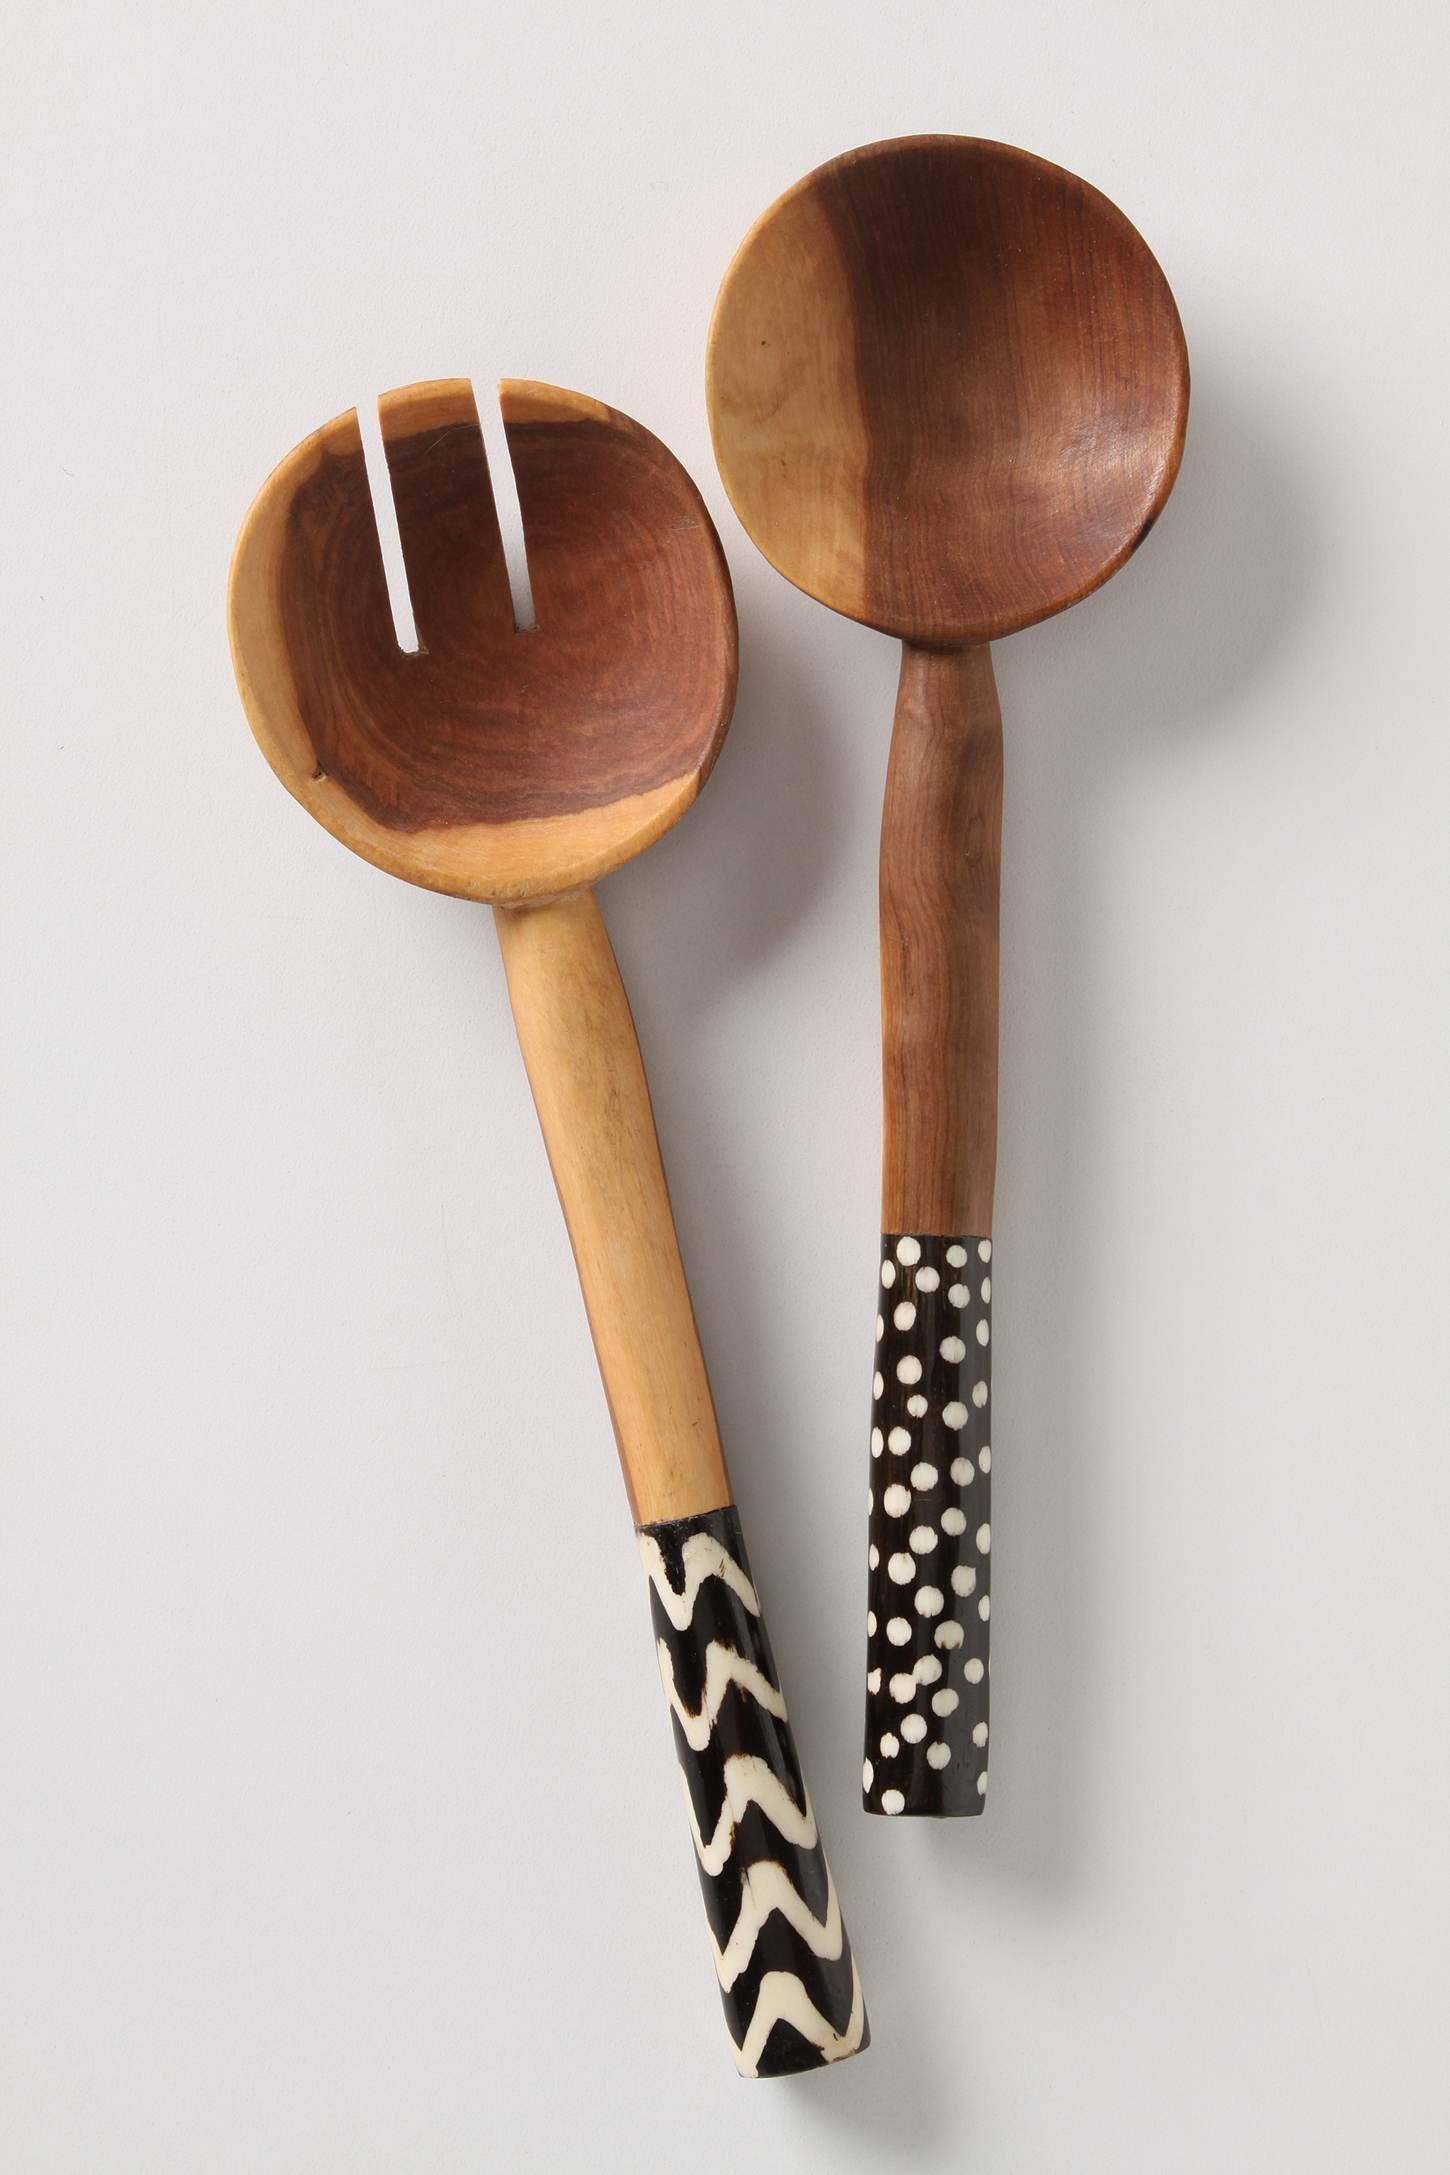 Anthro DIY Kitchen utensils! How adorable. Little things like this truly make a home unique.